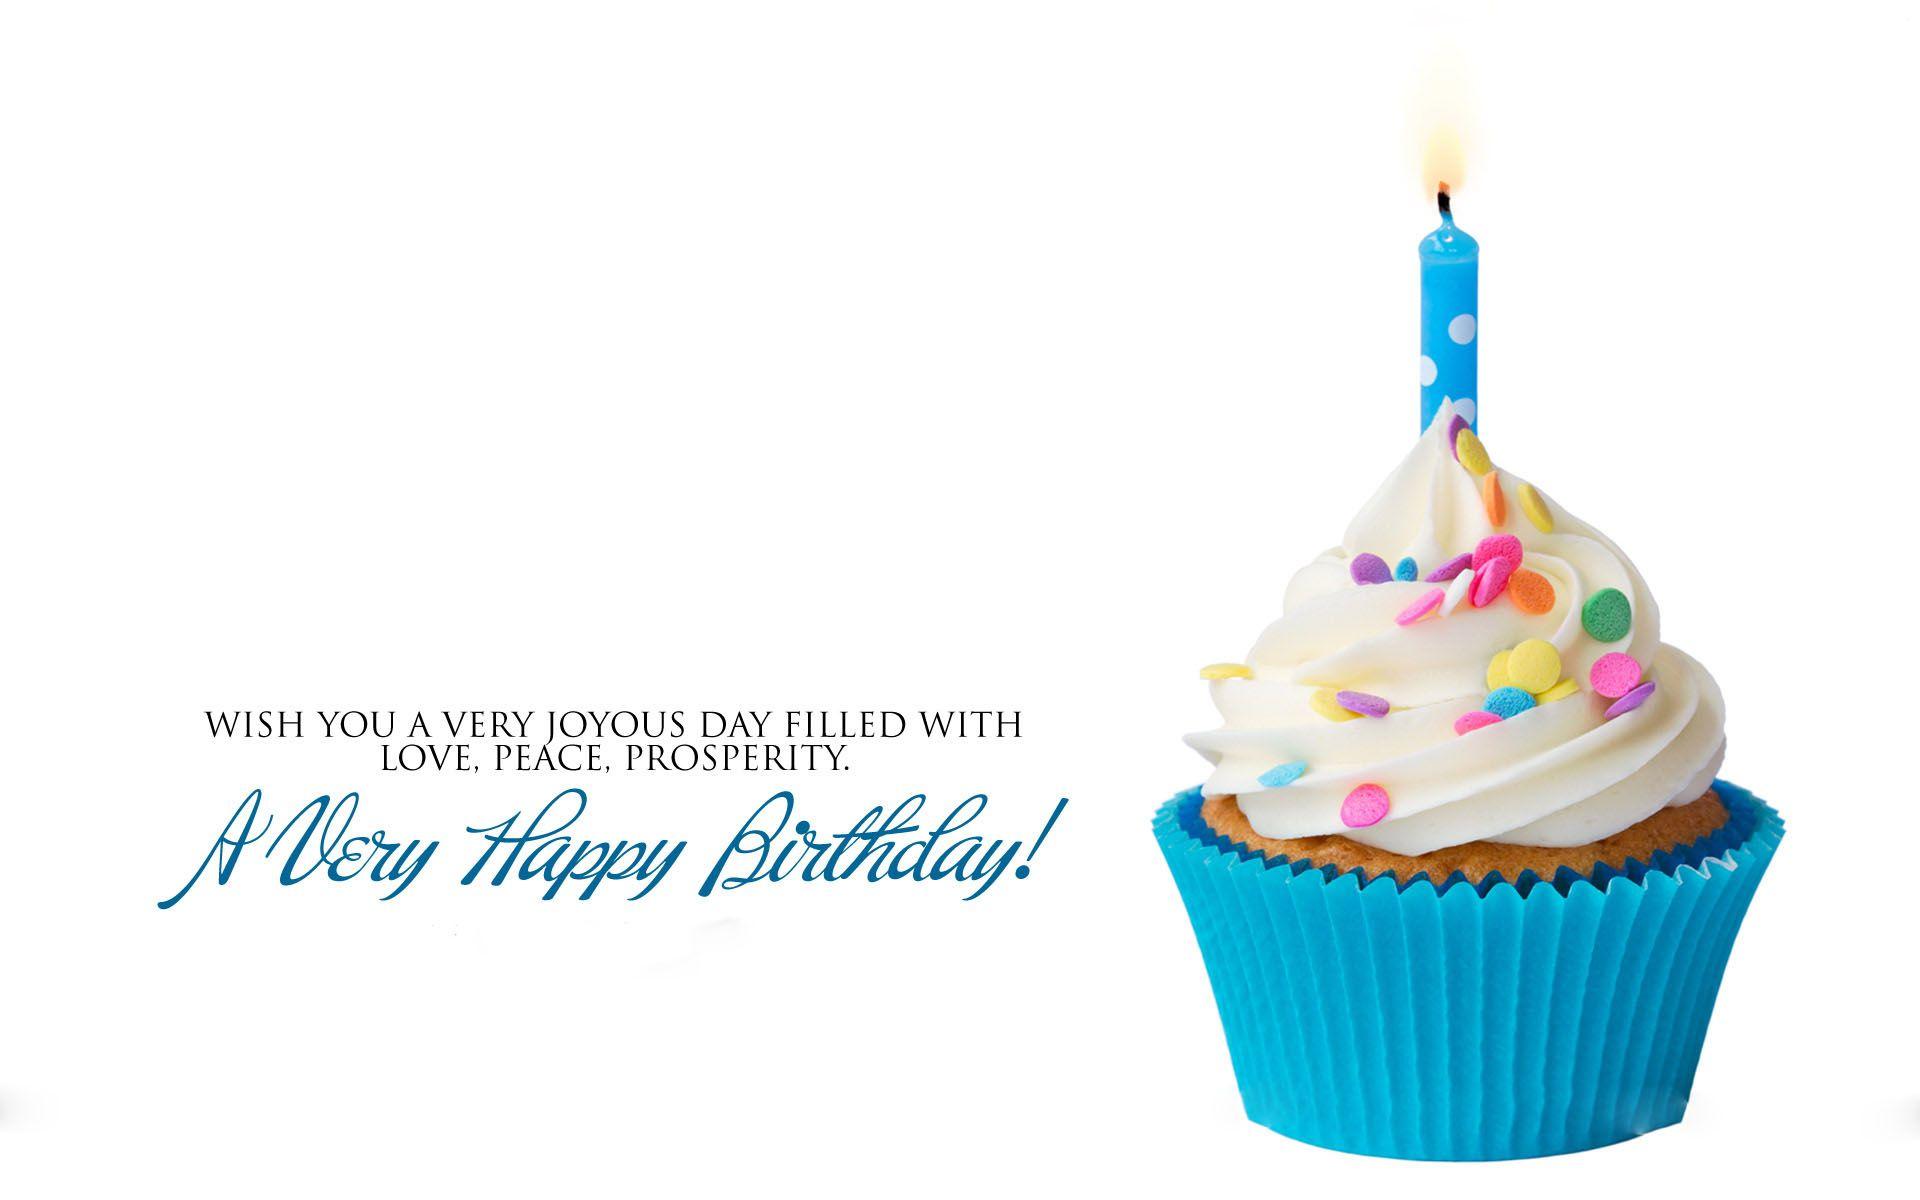 Free Download Happy Birthday Wishes Wallpaper Image